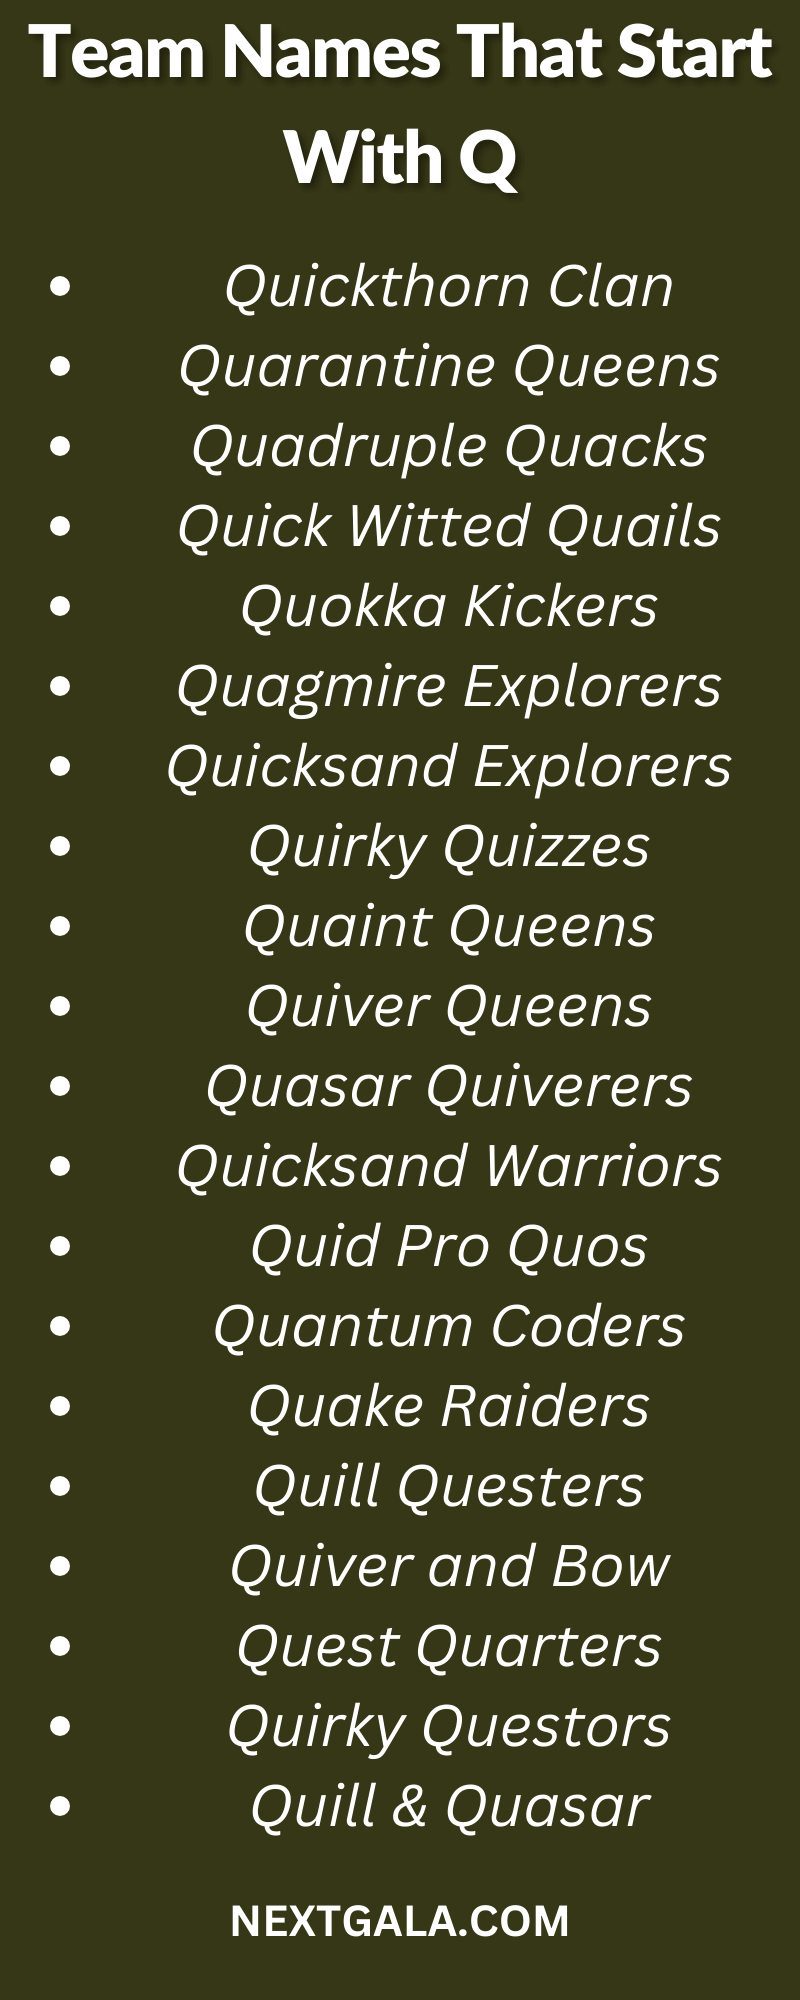 Team Names That Start With Q